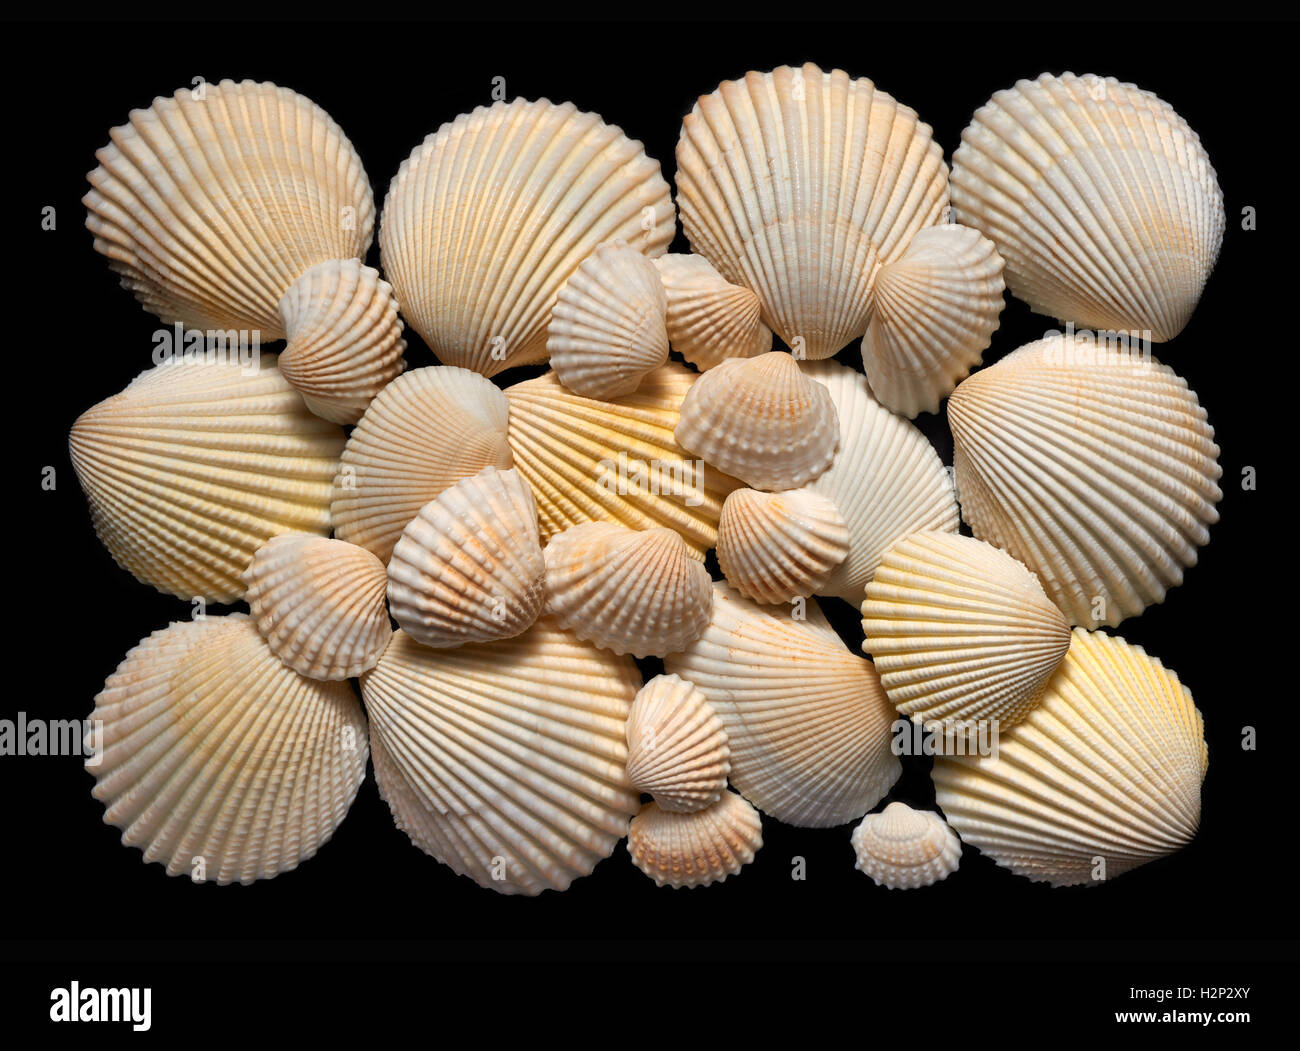 Backgrounds and textures: flat group of white and beige seashells, isolated on black background Stock Photo